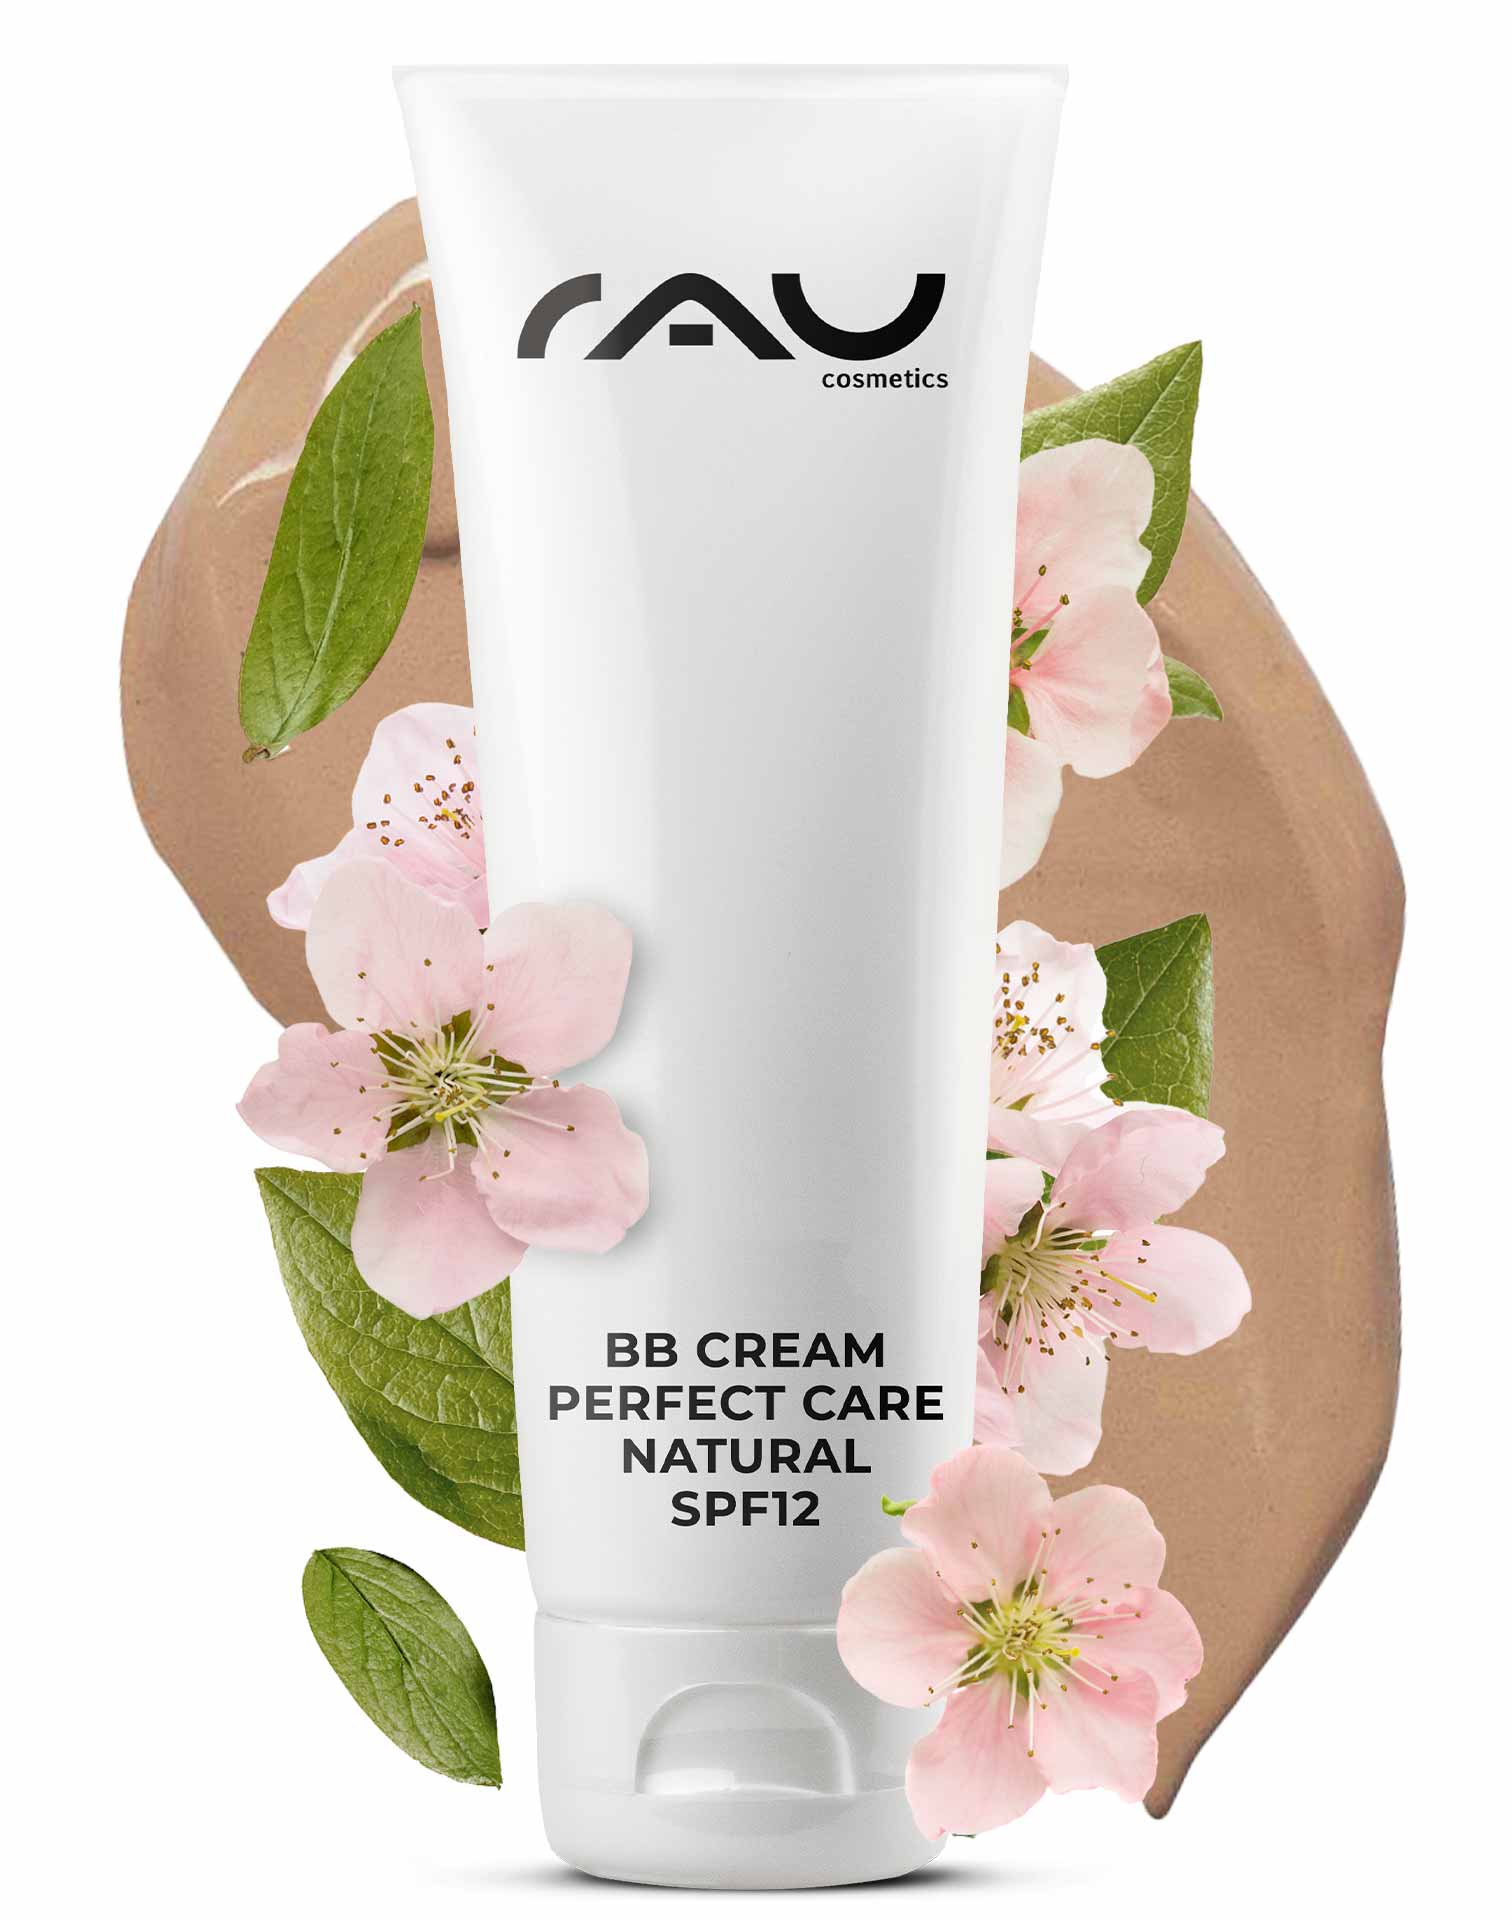 BB Cream Perfect Care Natural 75 ml SPF 12 Maquillage et soins